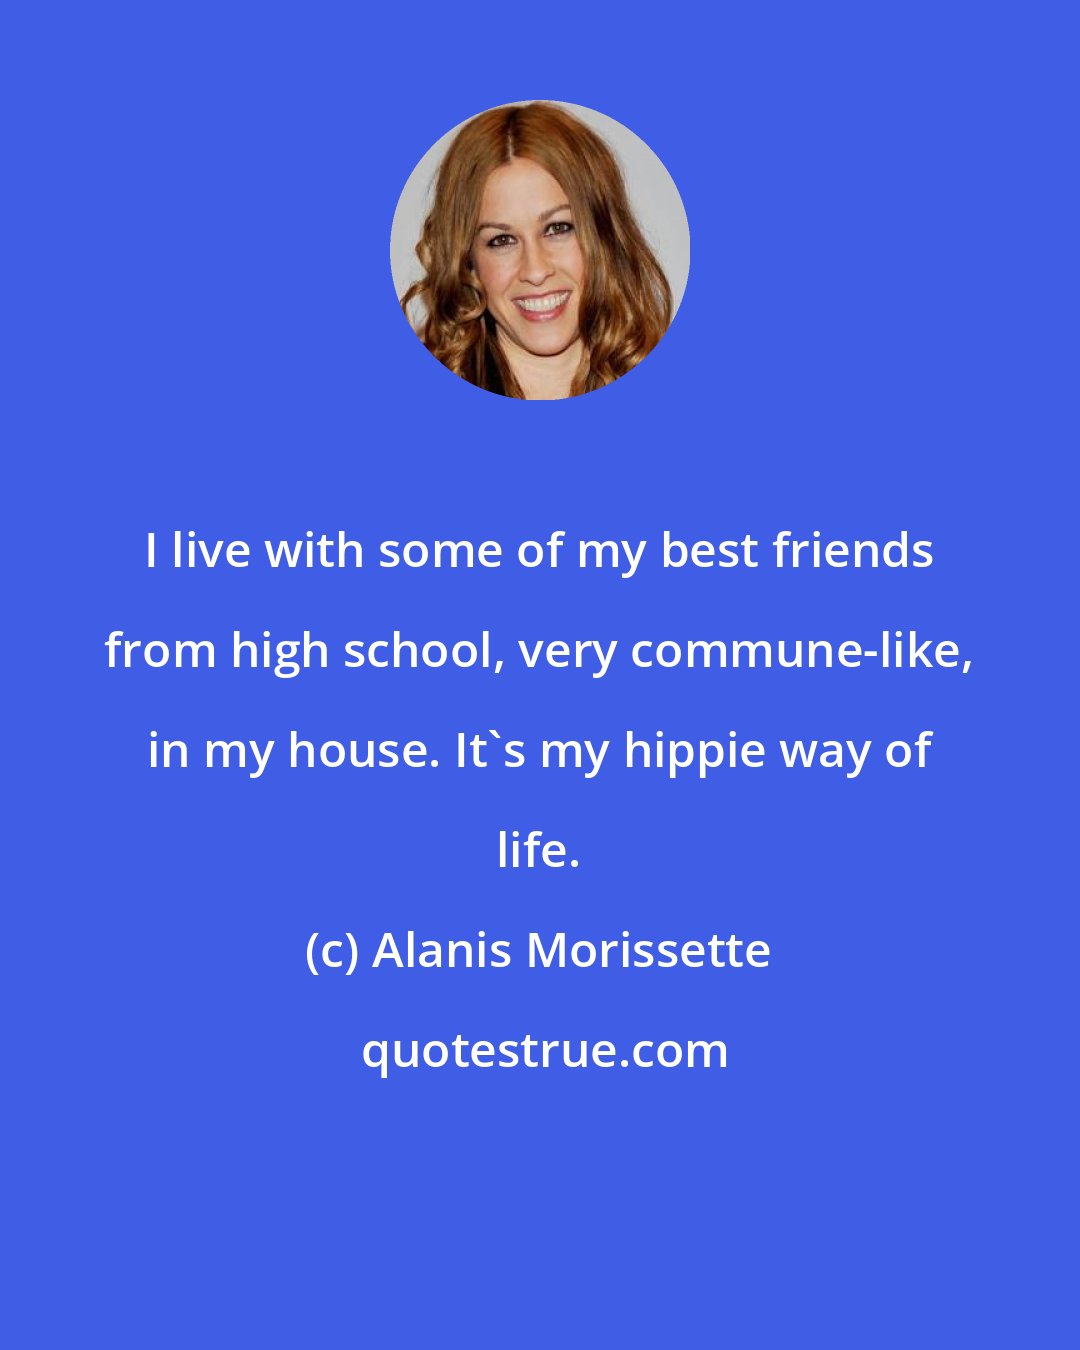 Alanis Morissette: I live with some of my best friends from high school, very commune-like, in my house. It's my hippie way of life.